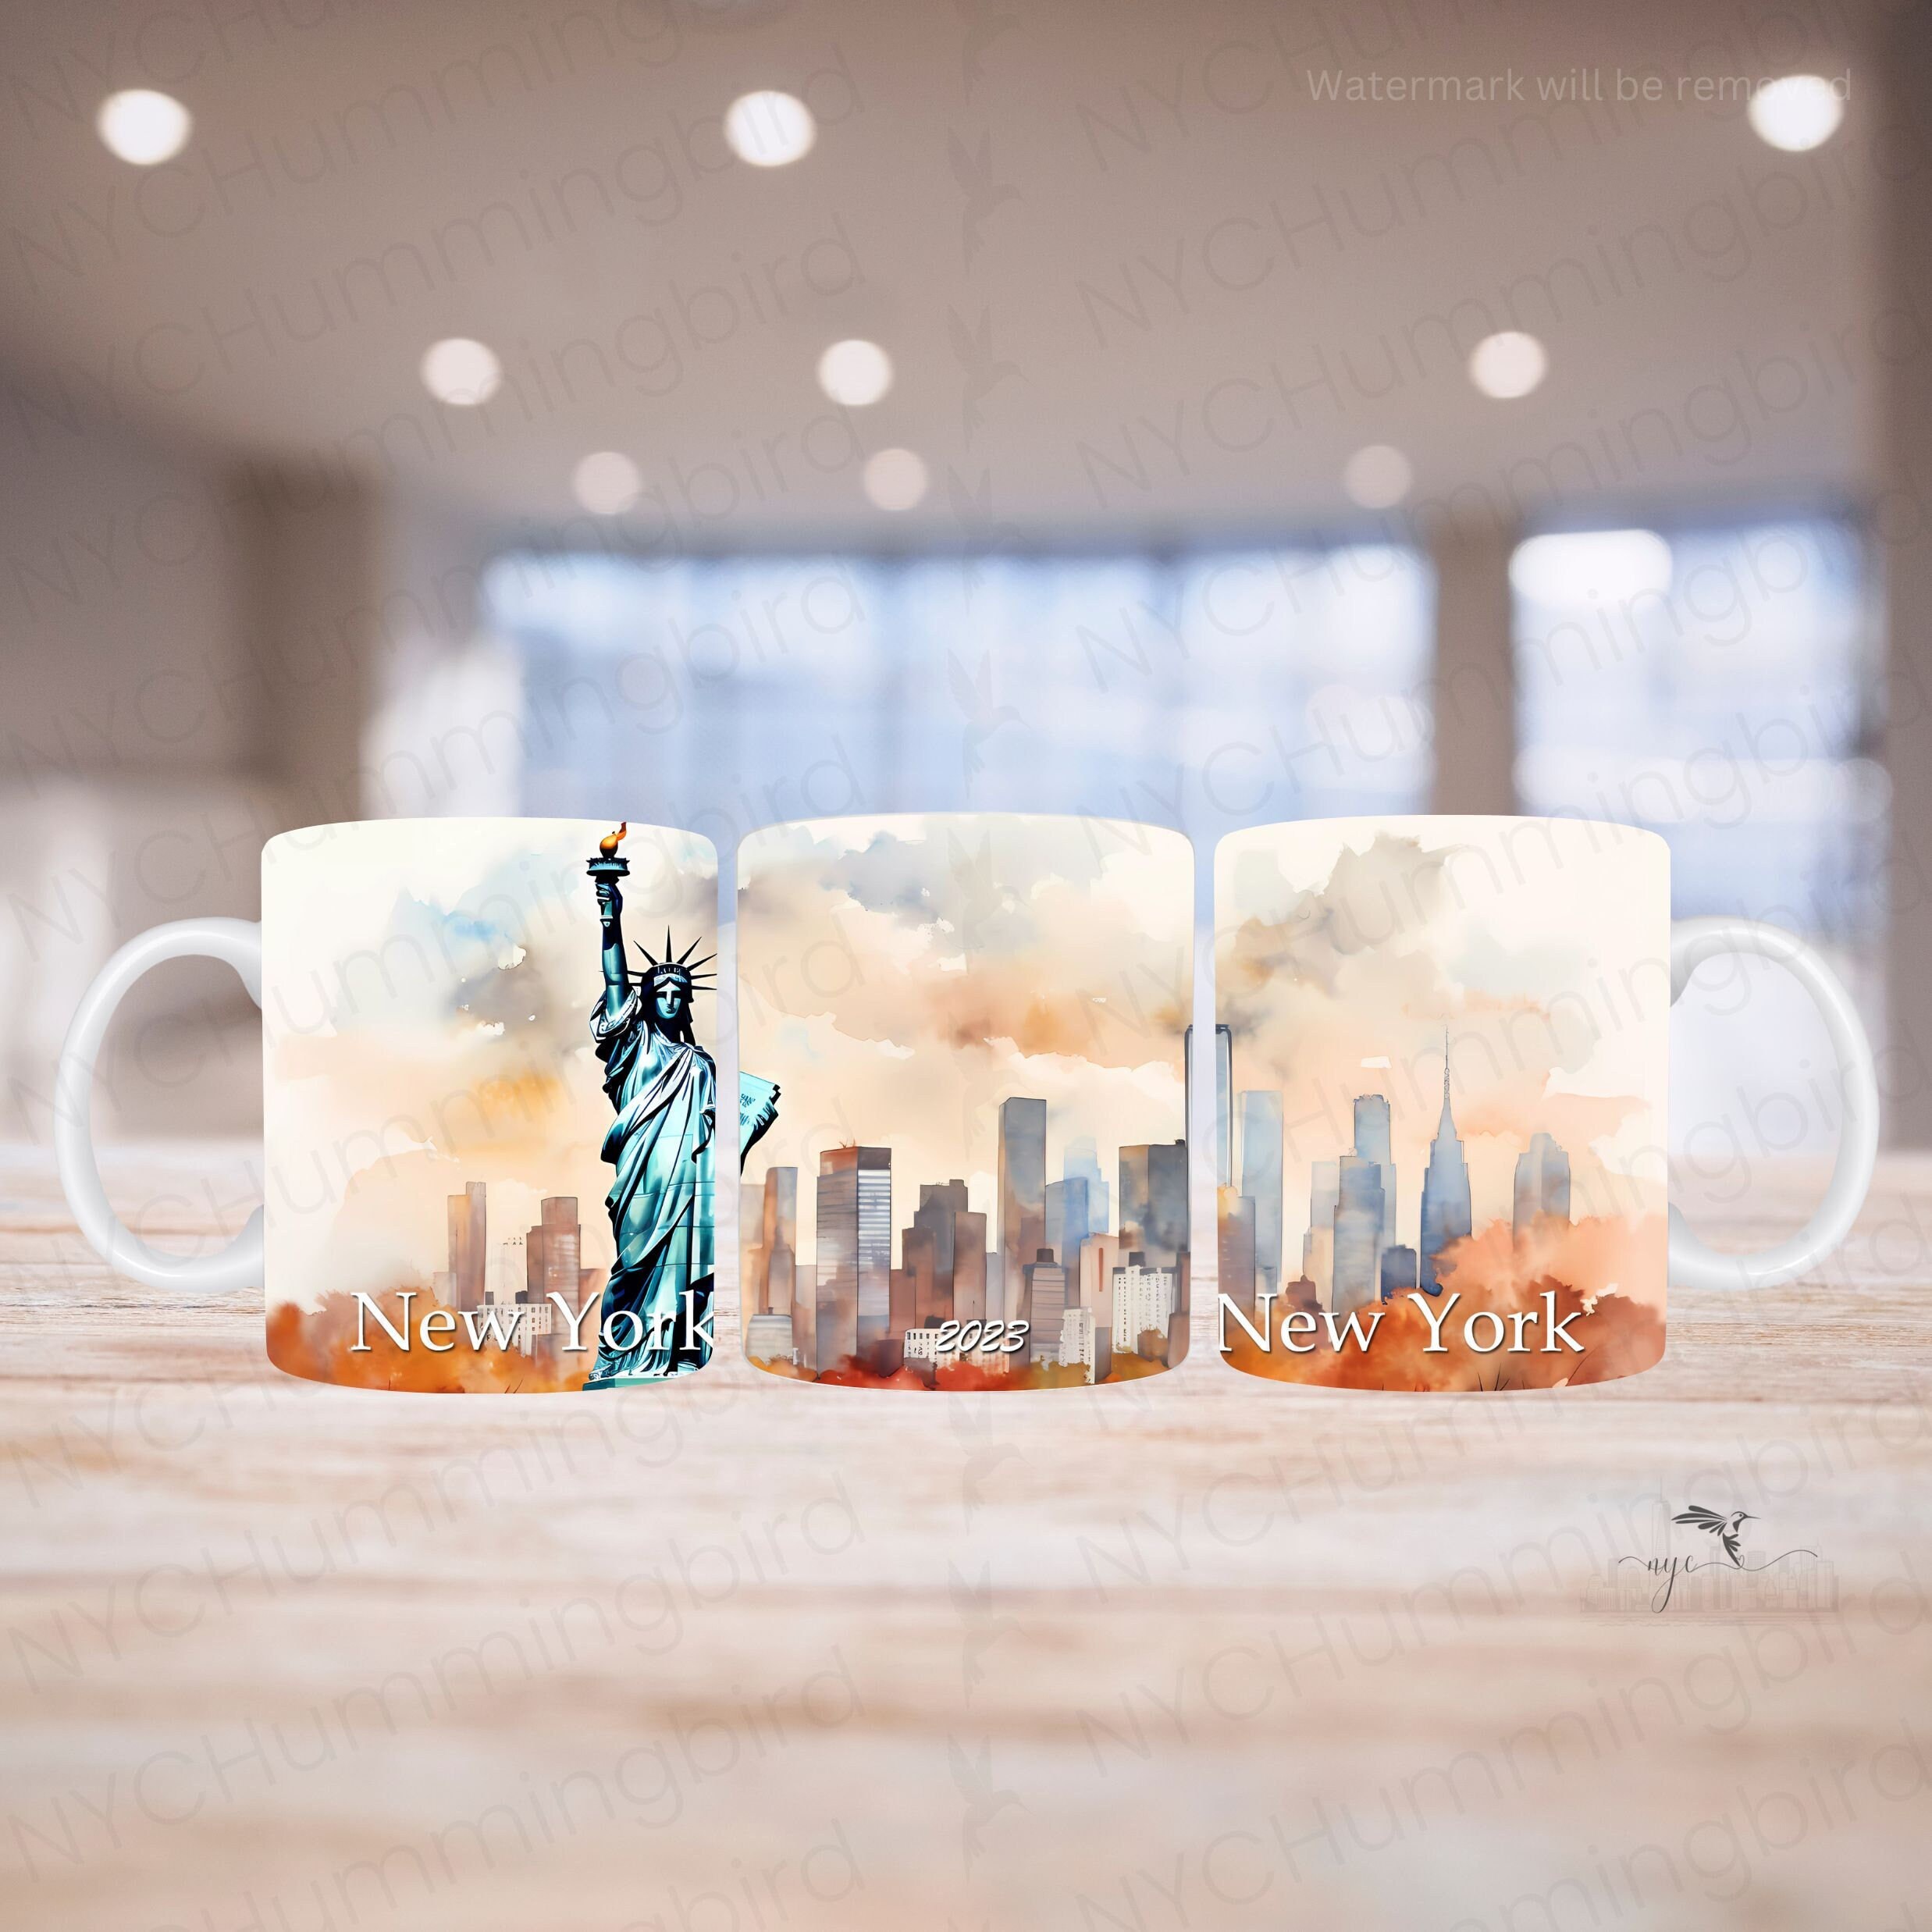 I Love New York Large Black Travel Mug Perfect Souvenir Travel Mug for Iced Coffee in Summer and A Hot Beverage in Winter